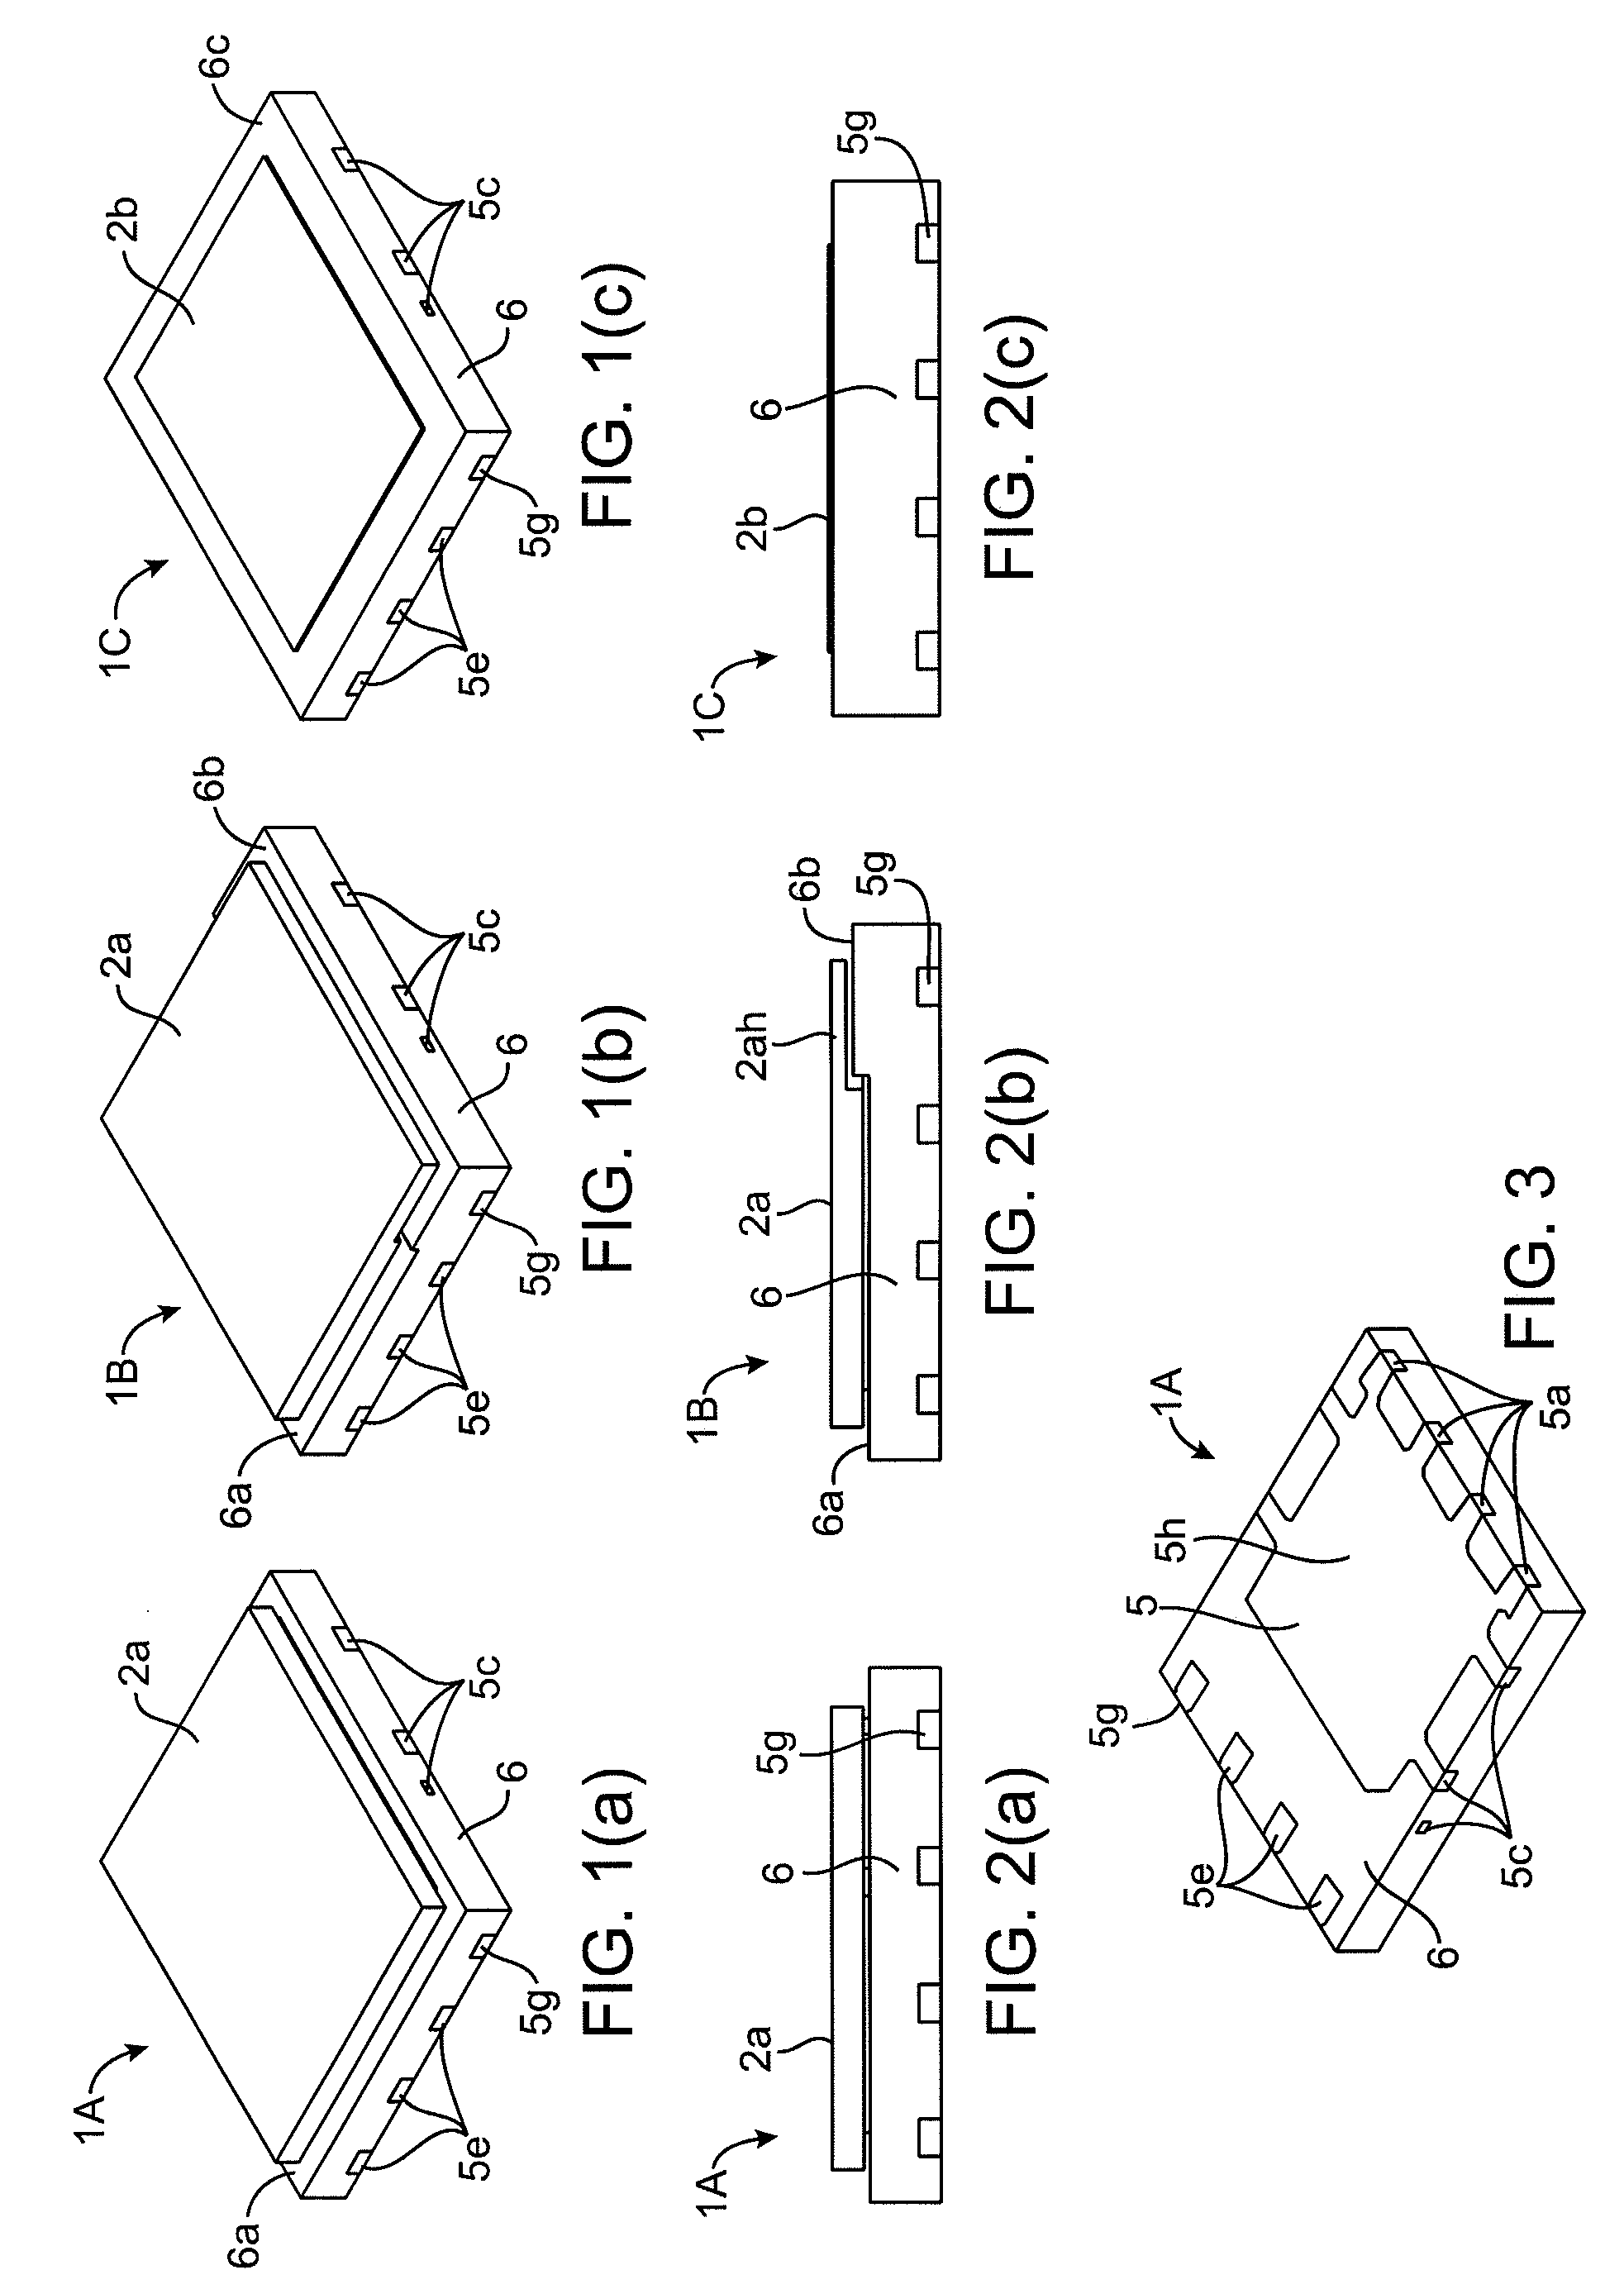 Semiconductor die package including low stress configuration